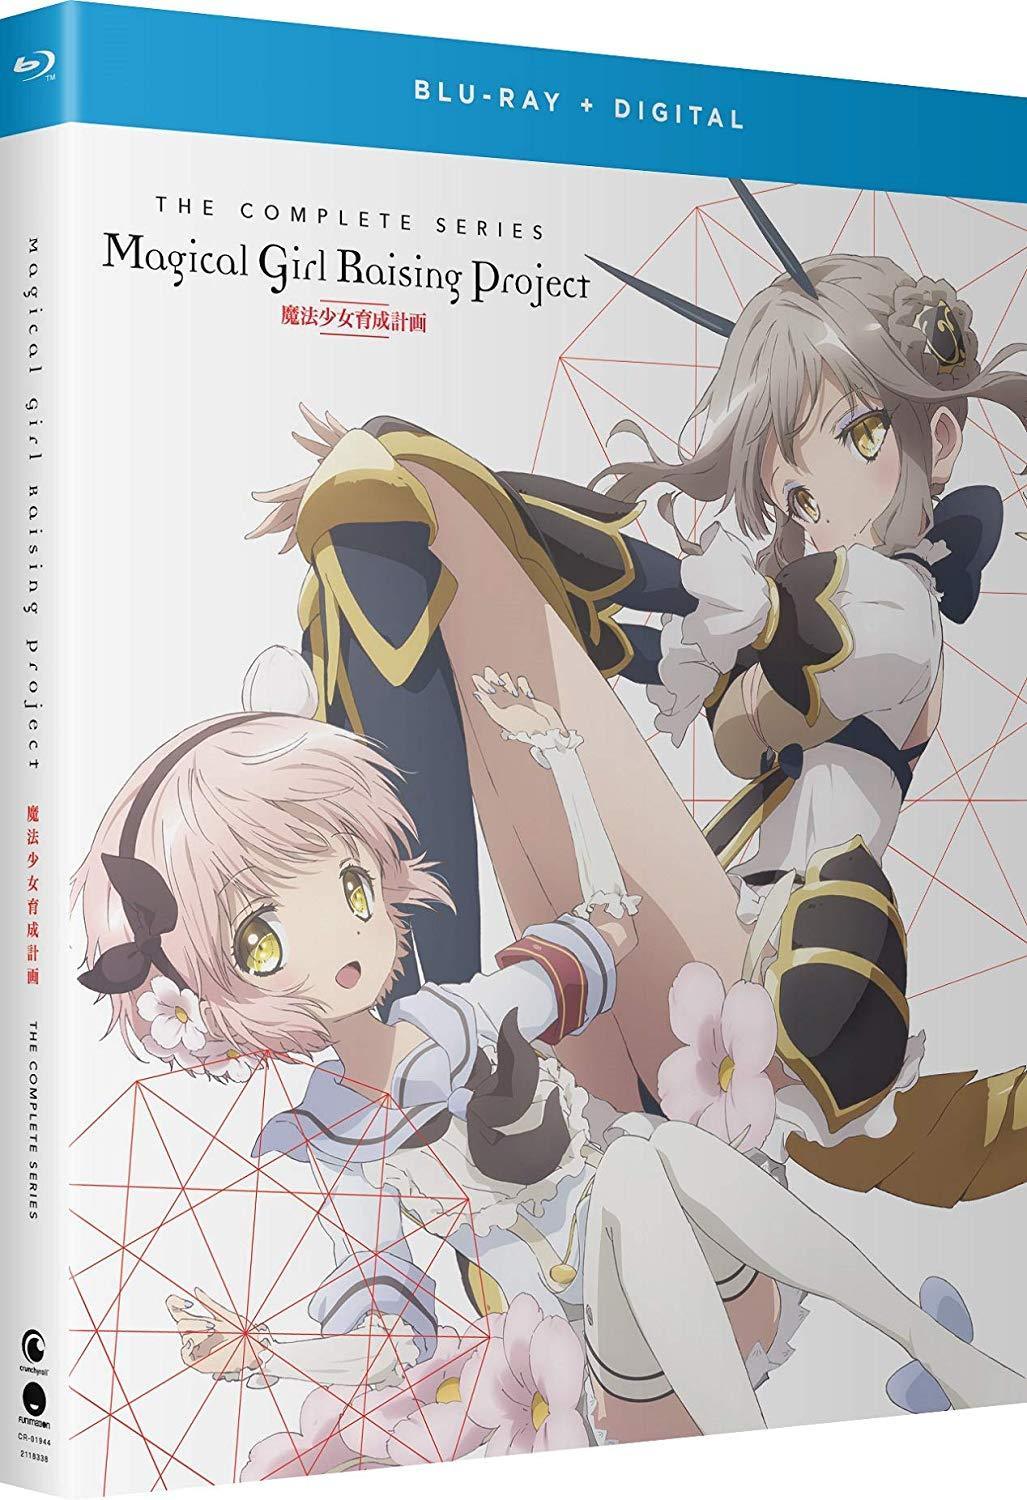 Magical Girl Raising Project - The Complete Series - Blu-ray image count 1